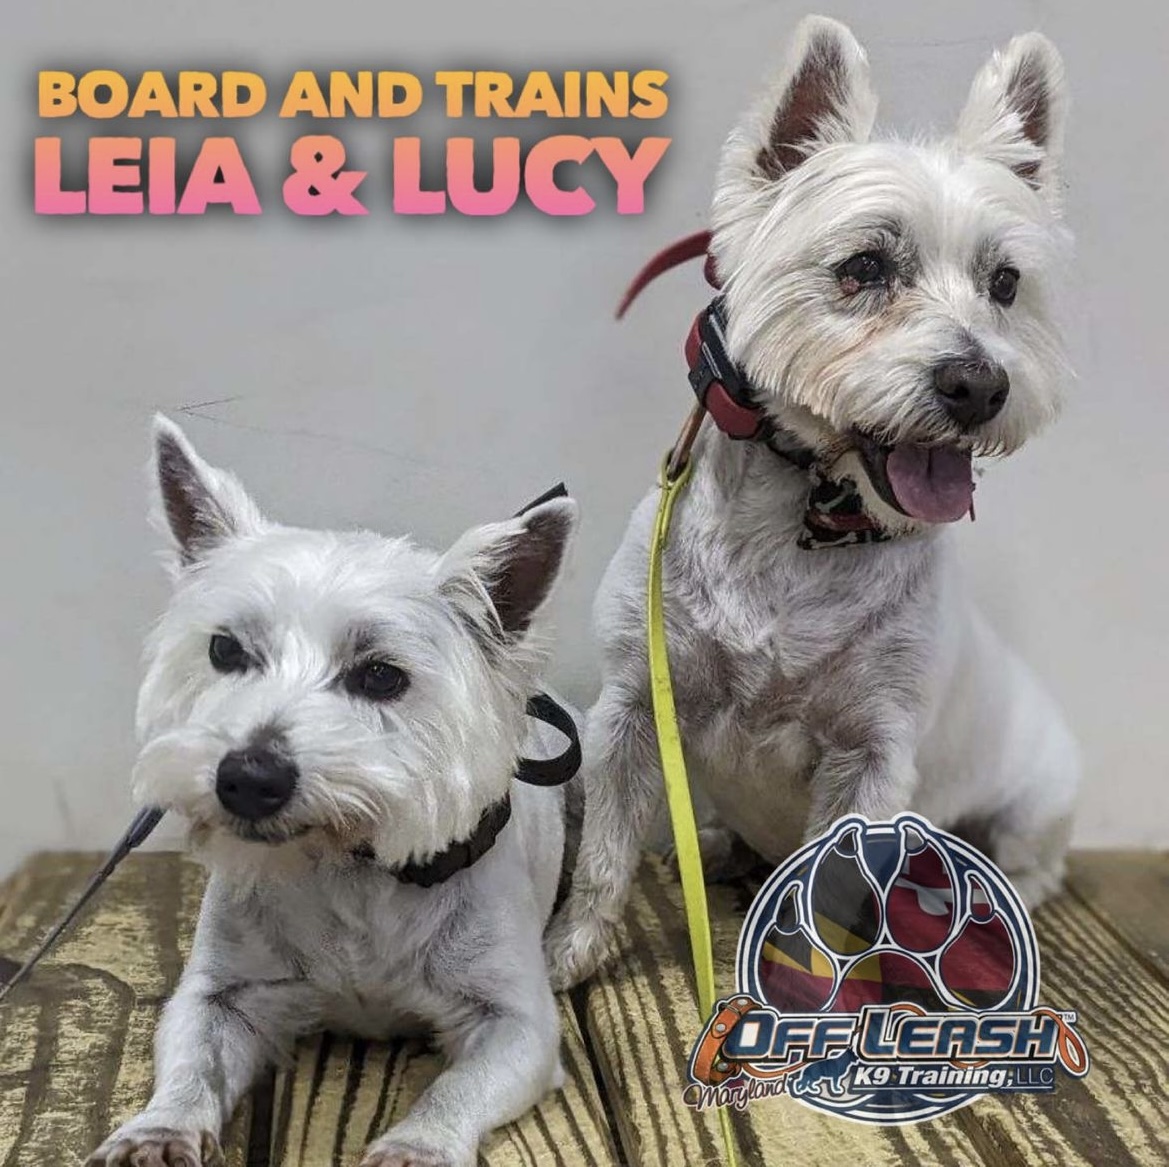 Two dogs, Leia and Lucy, who completed our canine board and train program